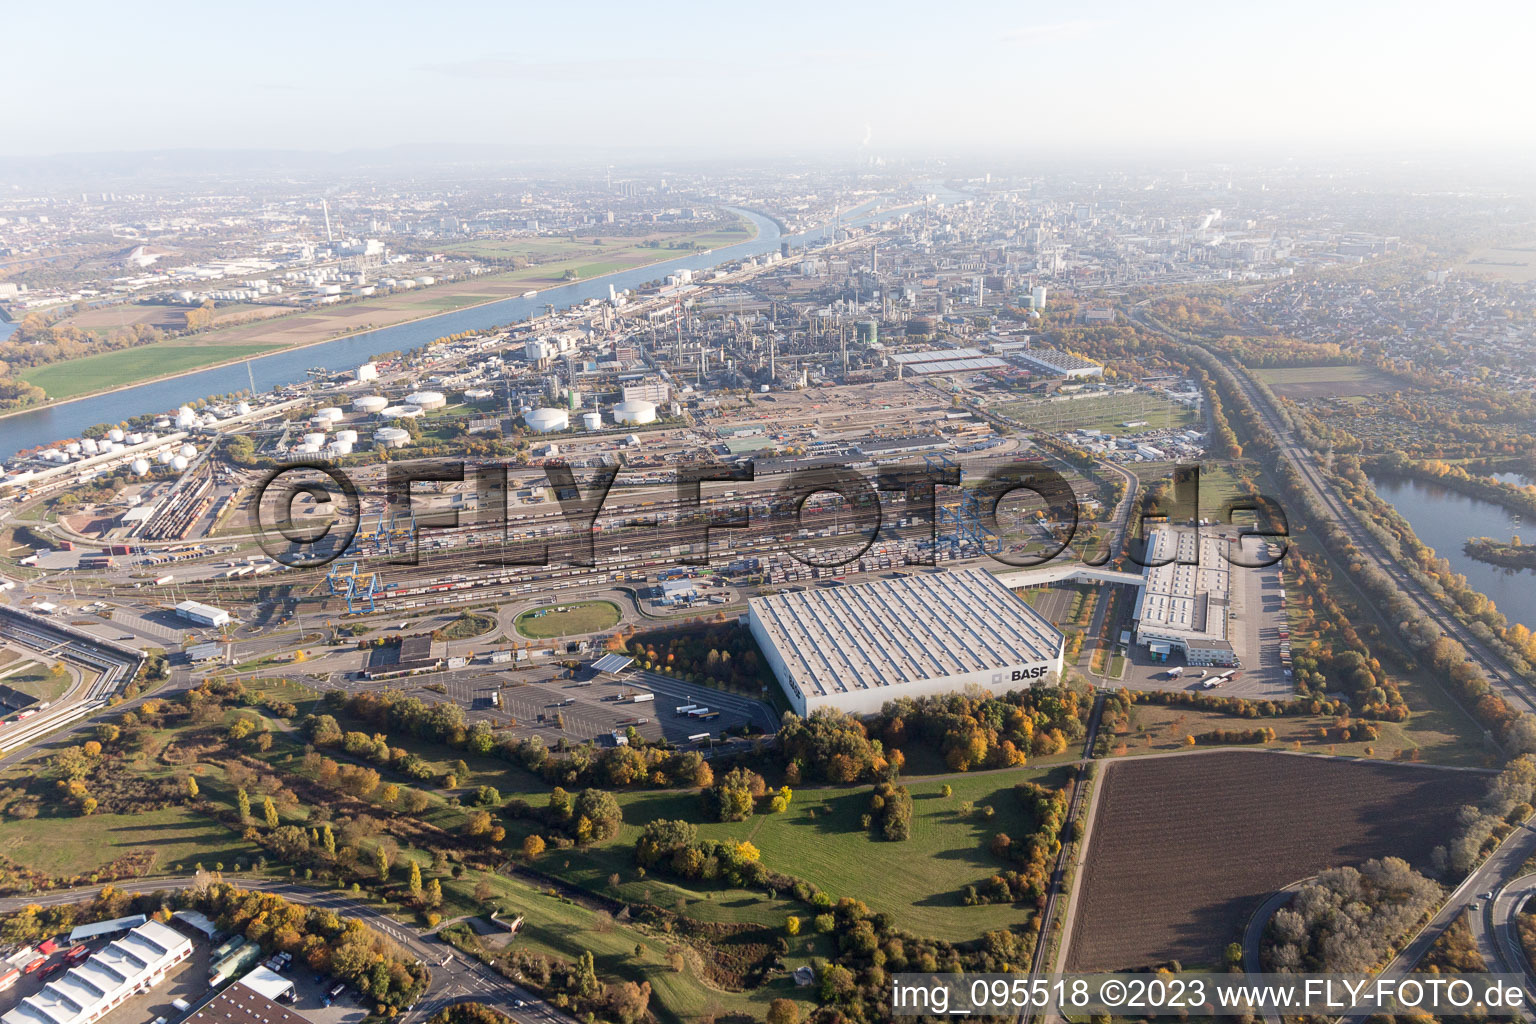 Aerial view of North in the district BASF in Ludwigshafen am Rhein in the state Rhineland-Palatinate, Germany